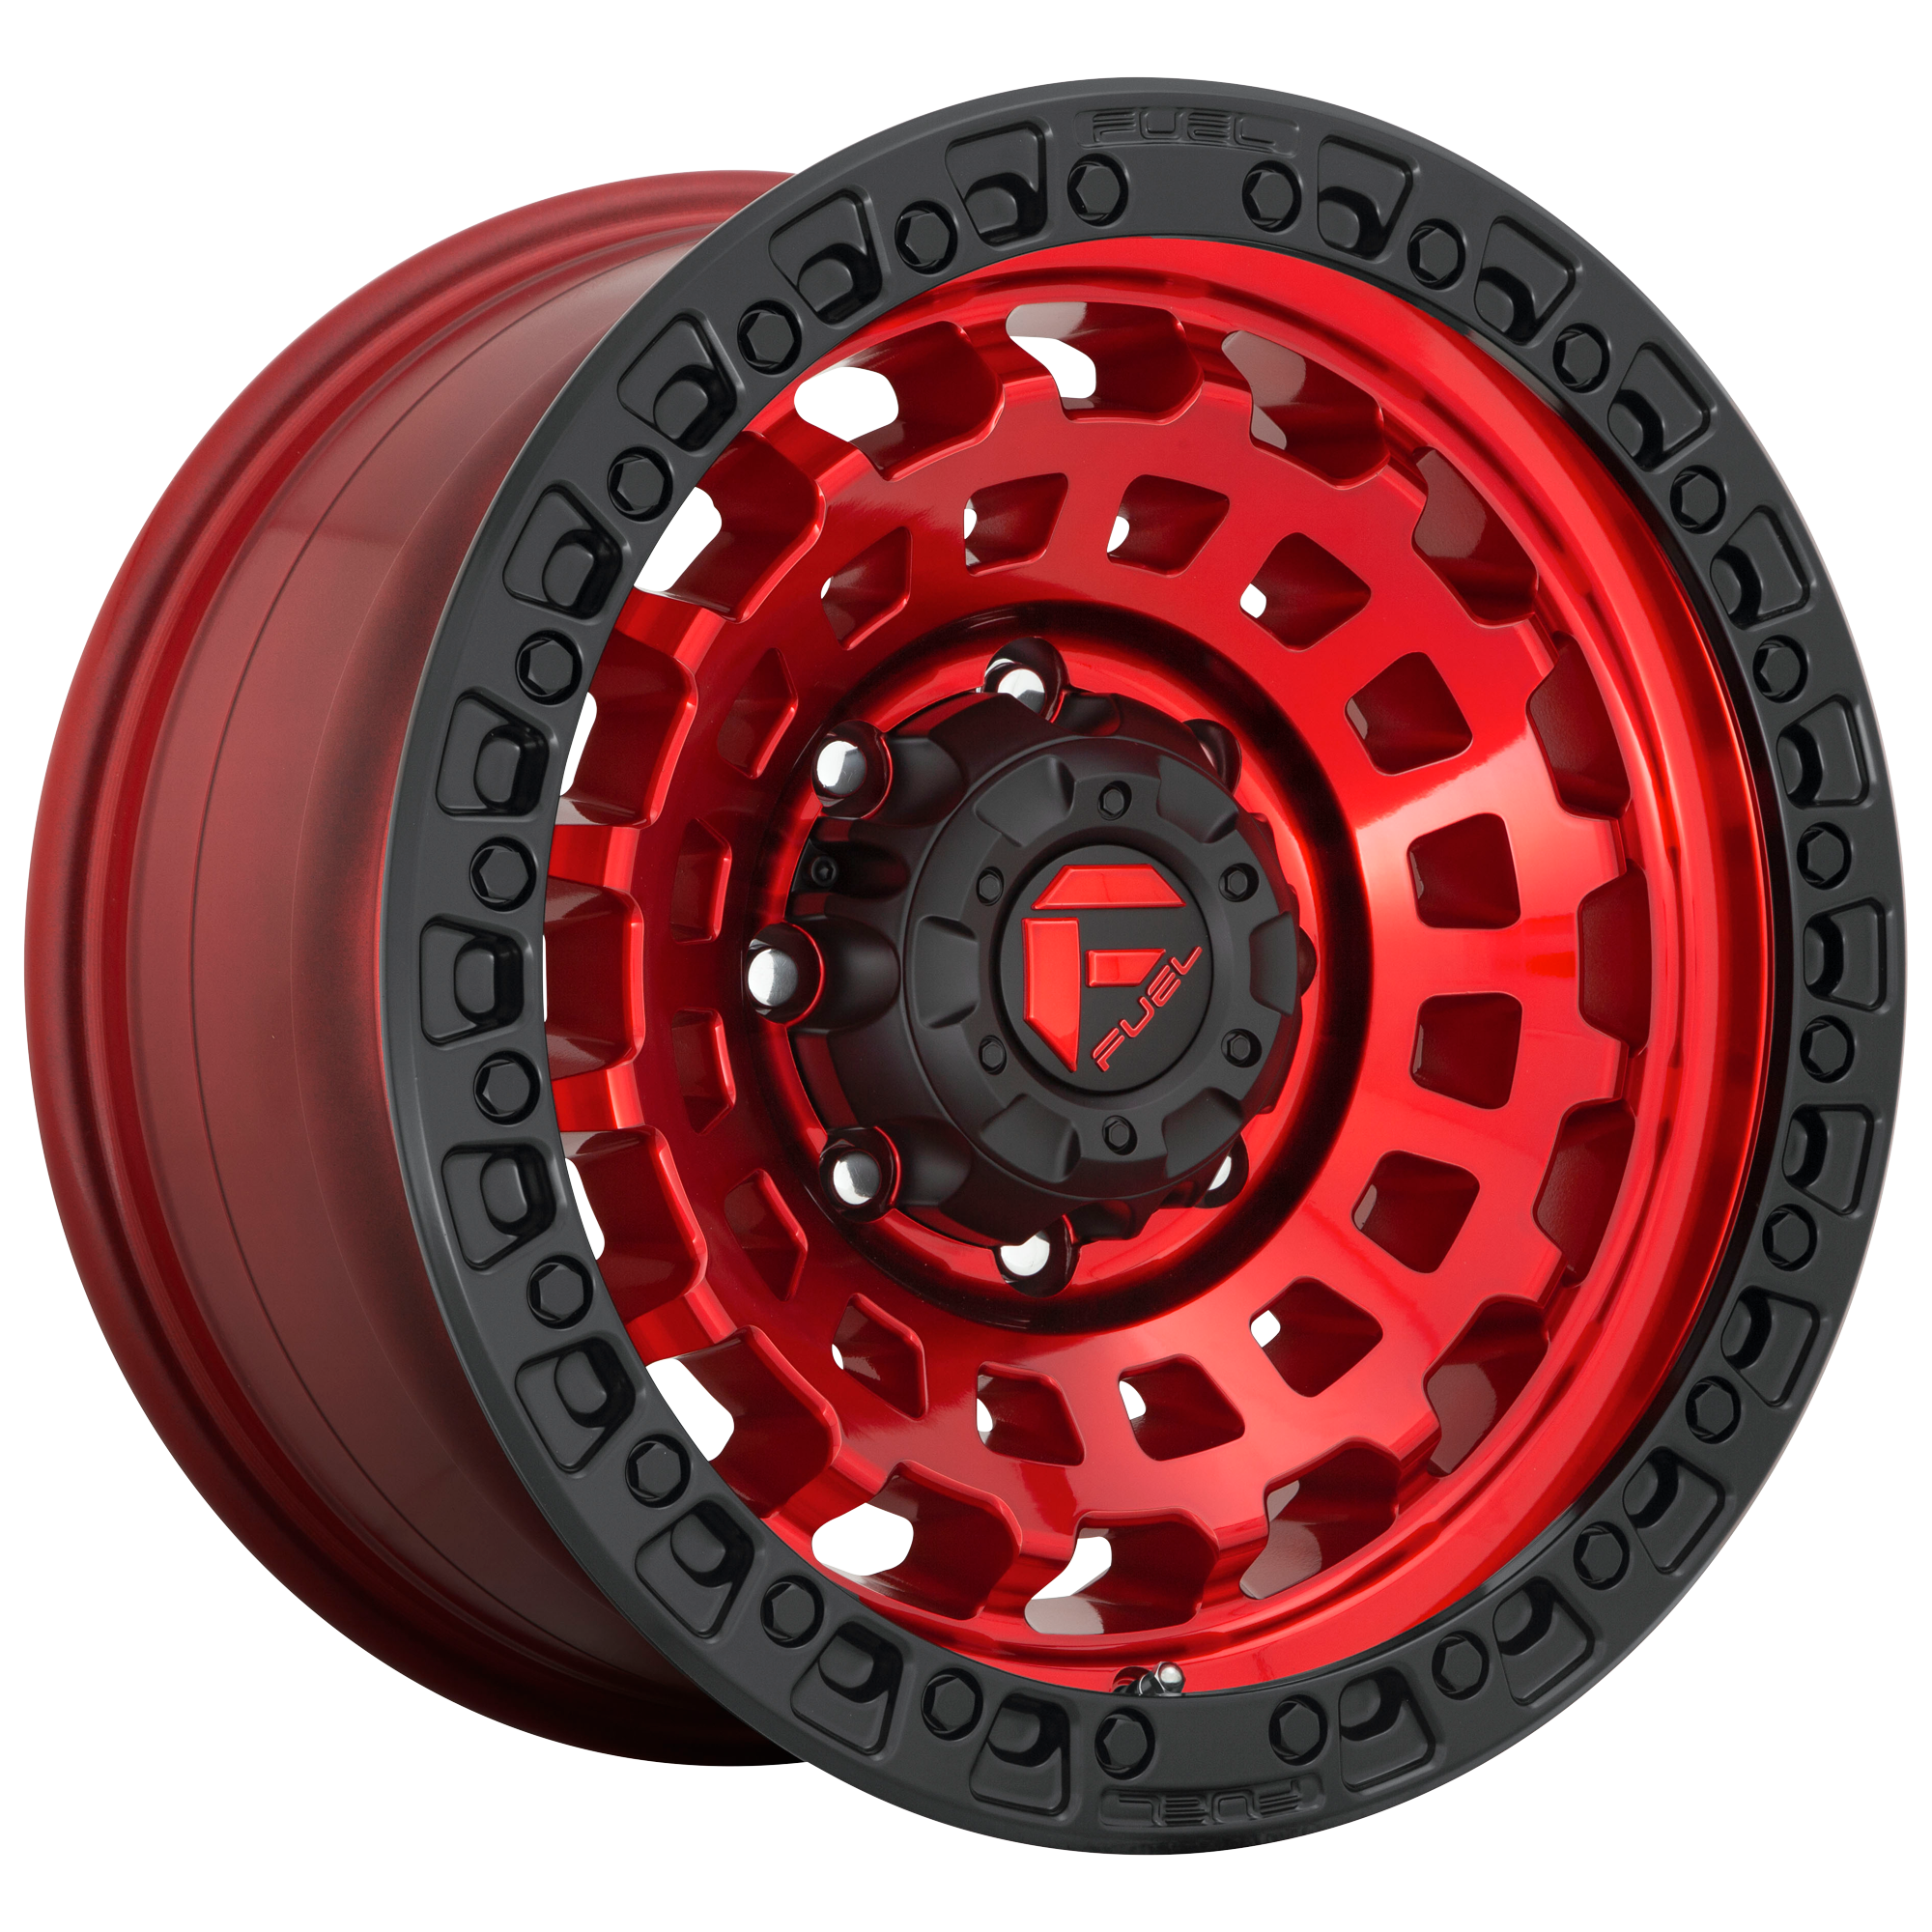 ZEPHYR 20x9 6x135.00 CANDY RED BLACK BEAD RING (20 mm) - Tires and Engine Performance